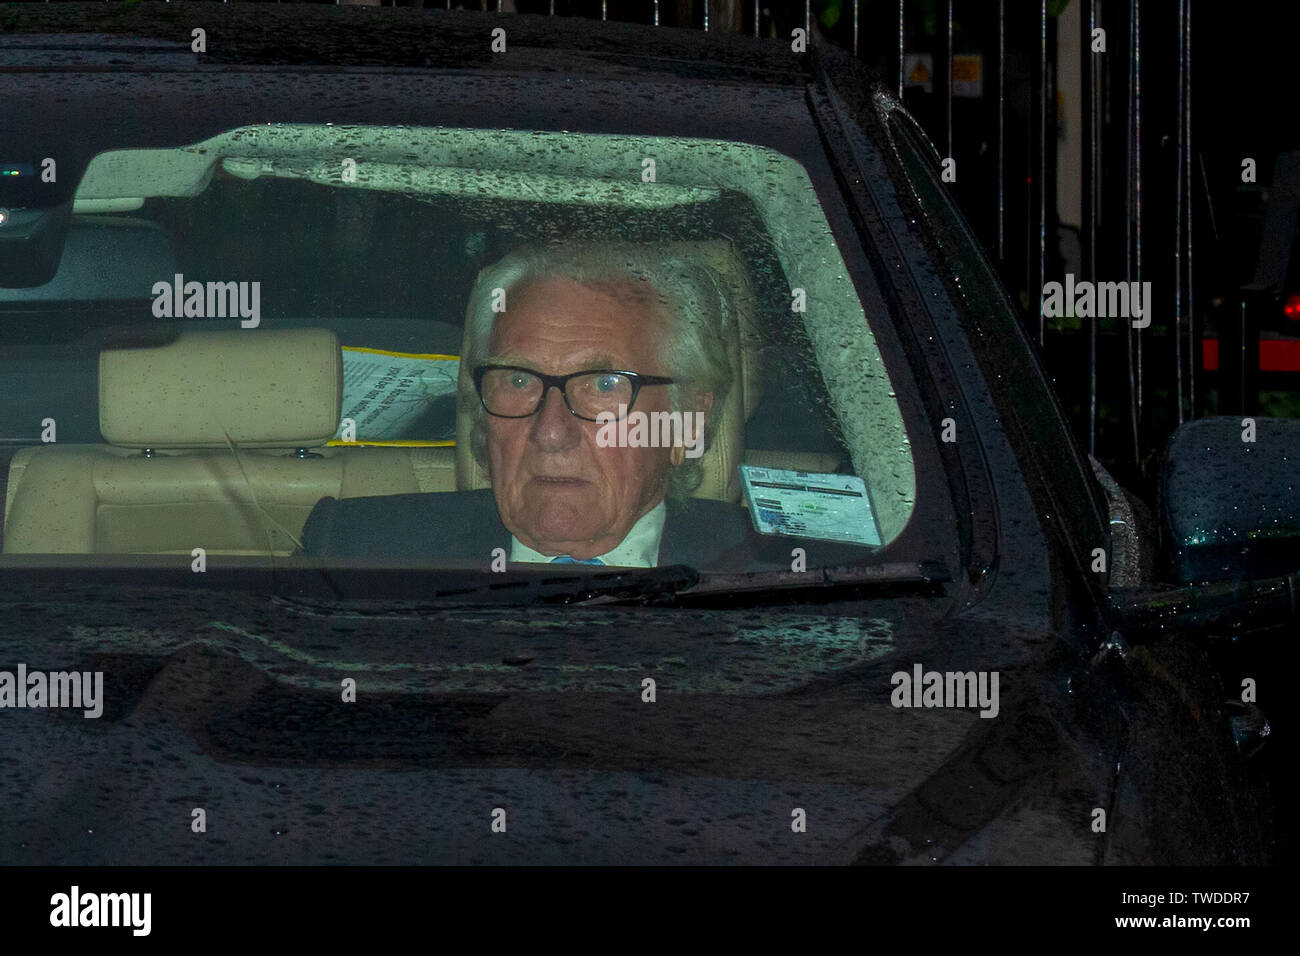 Lord Heseltine leaves the Houses of Parliament, London. A third Conservative Party leadership vote has taken place at Parliament today, with Rory Stewart eliminated from the race to become the next Prime Minister. Heseltine, a former Deputy Prime Minister, has said in an interview that he is 'disenfranchised' following Tuesday's televised debate. He criticised the remaining candidates for their lack of clear policies. Stock Photo